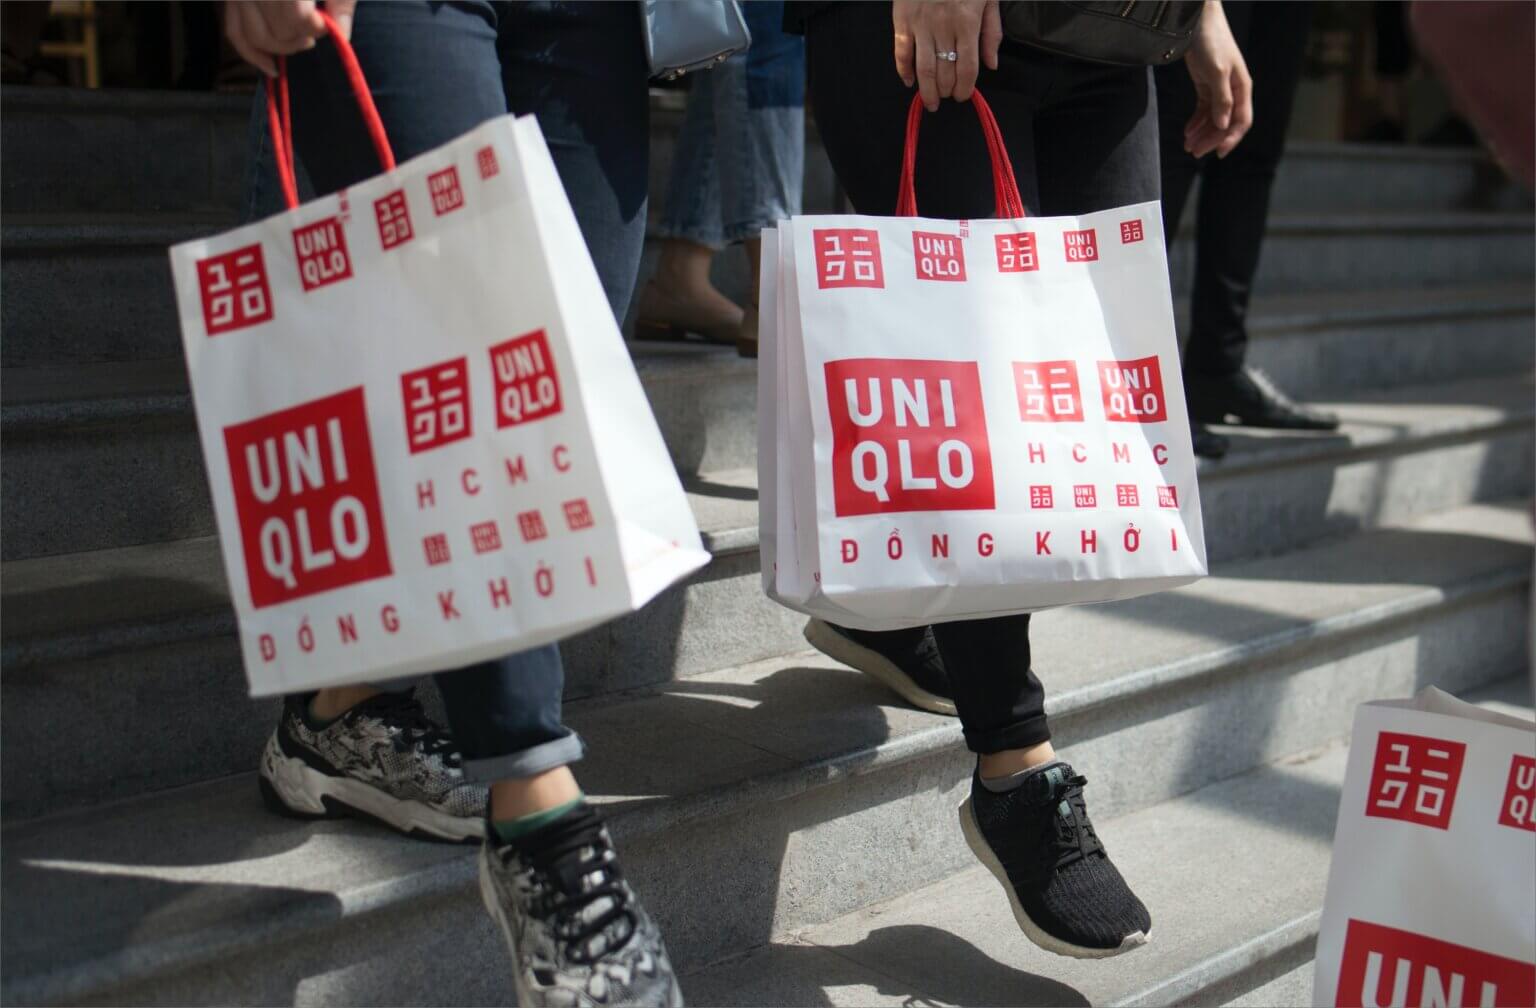 Crowds out in force for launch of first Uniqlo store in downtown HCM City